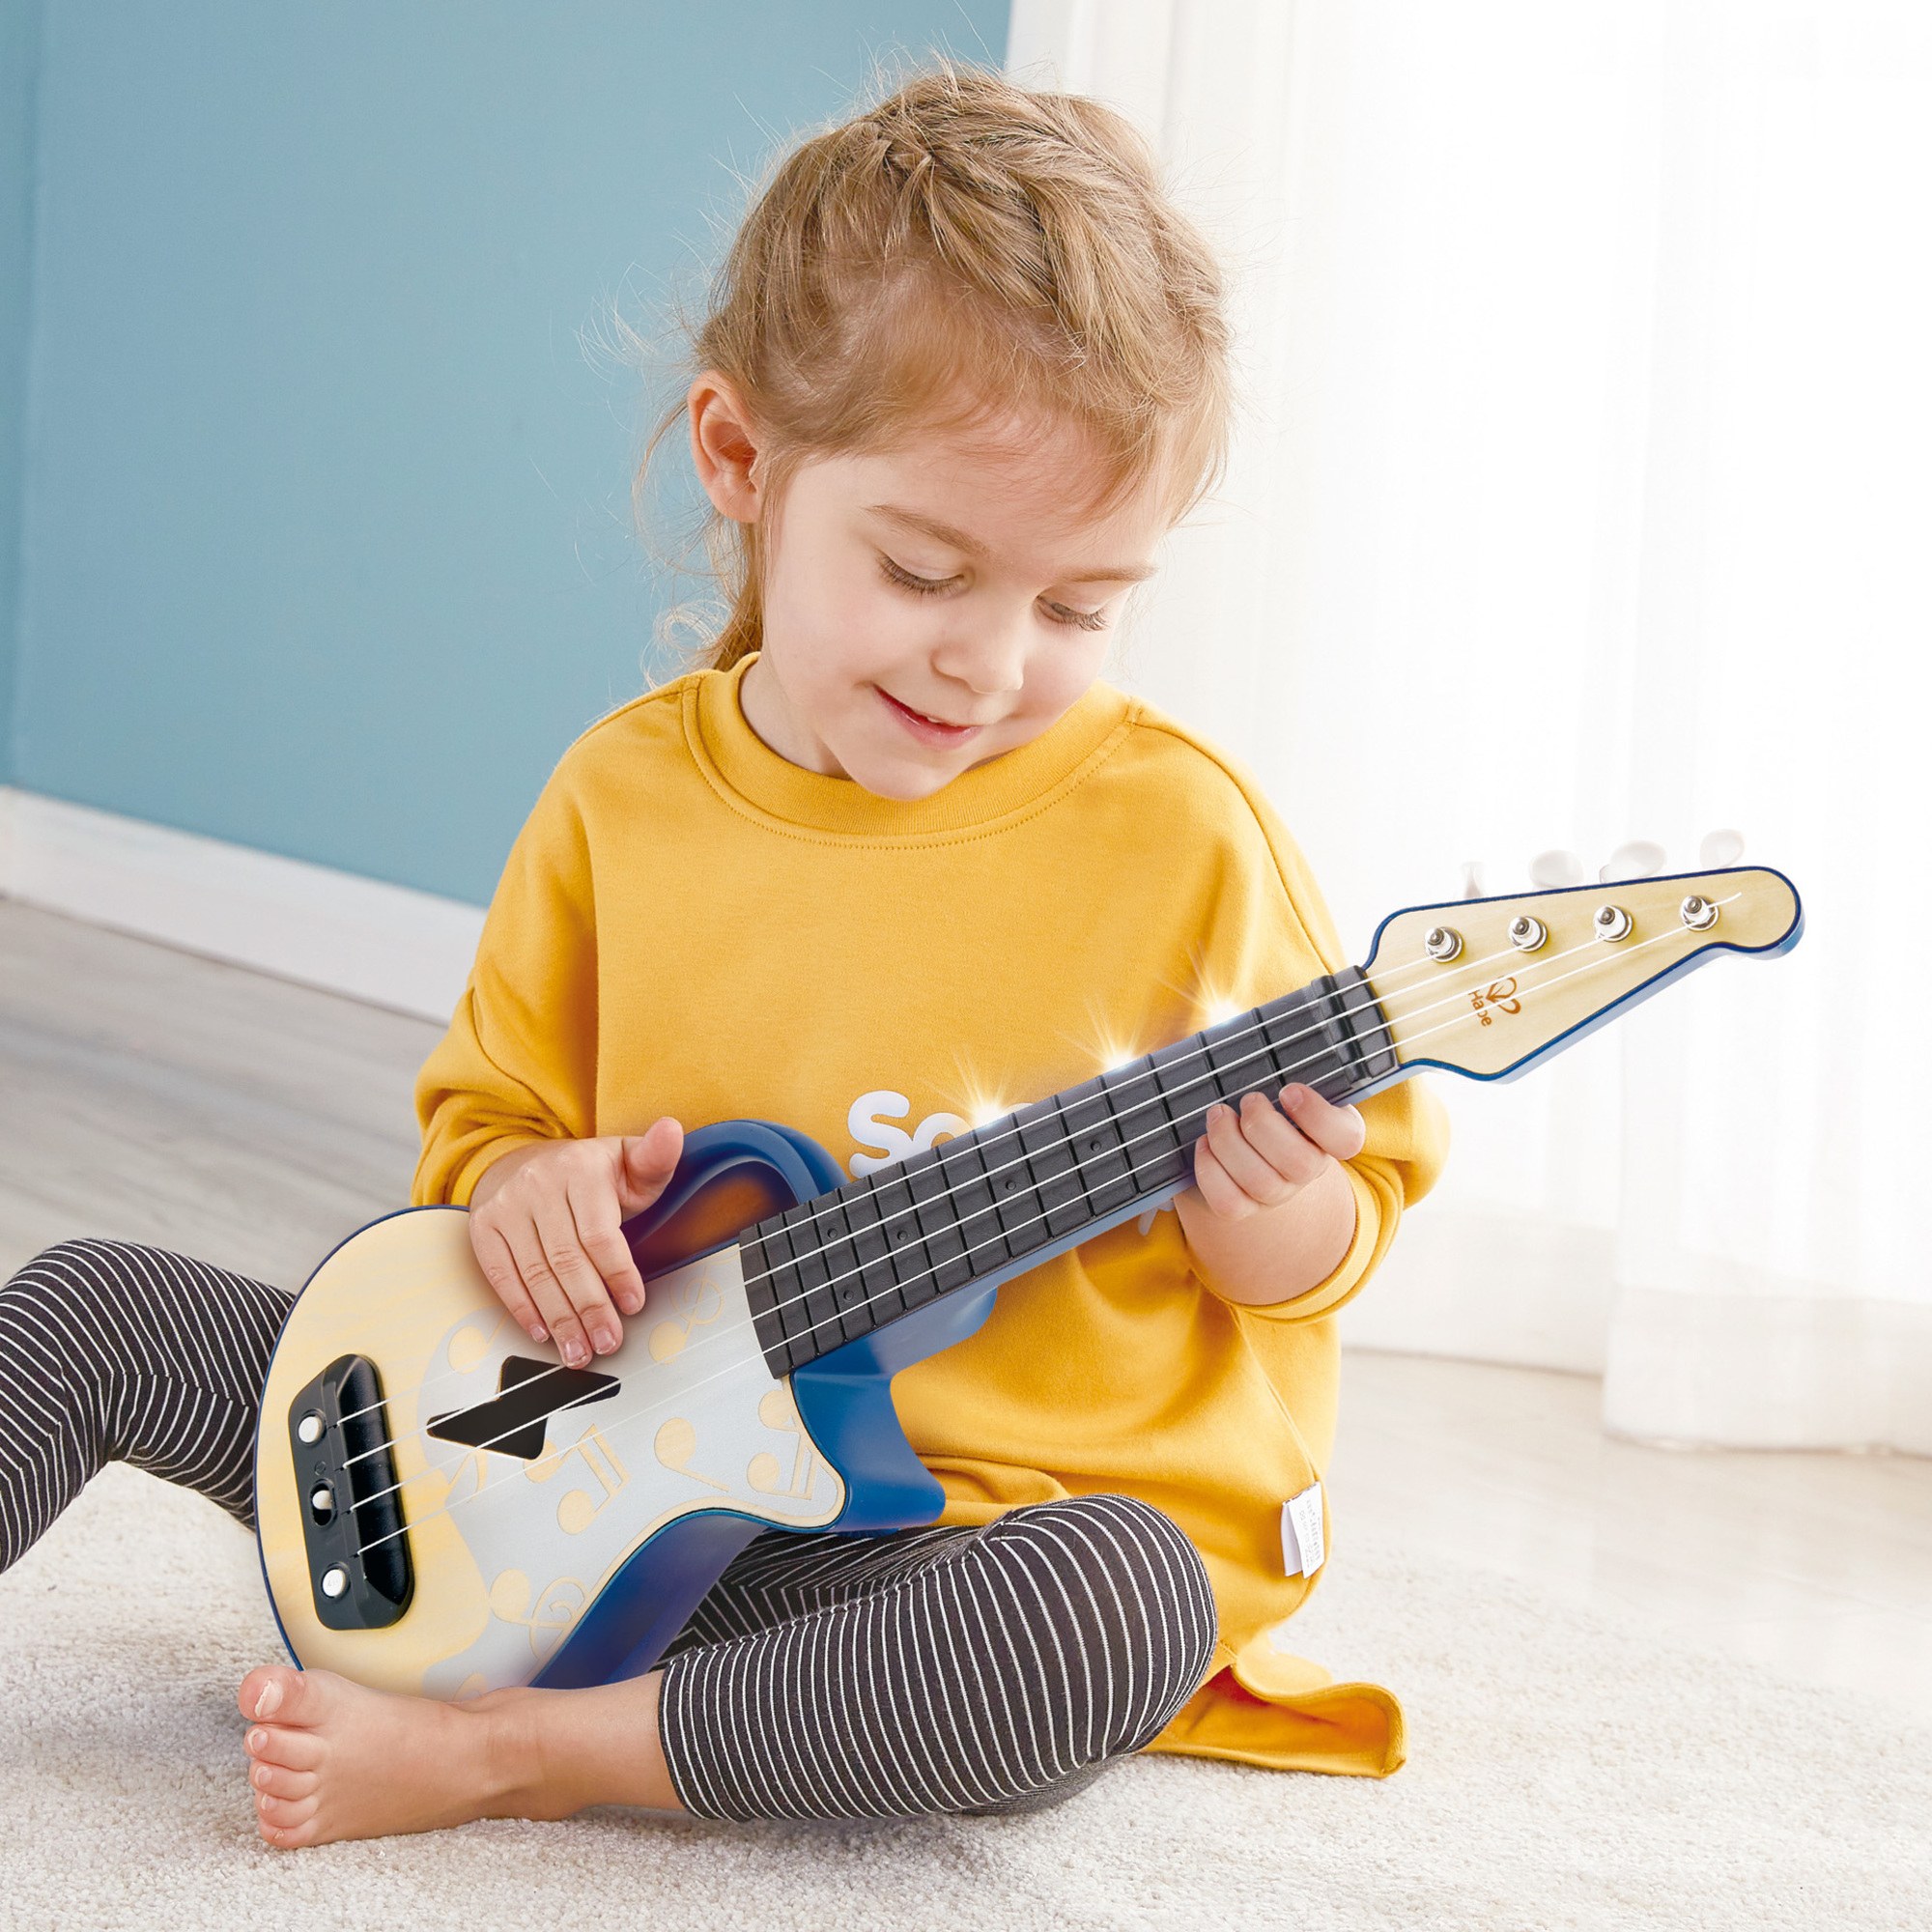 Hape Learn With Lights Kid's Electronic Ukulele in Blue - image 8 of 8